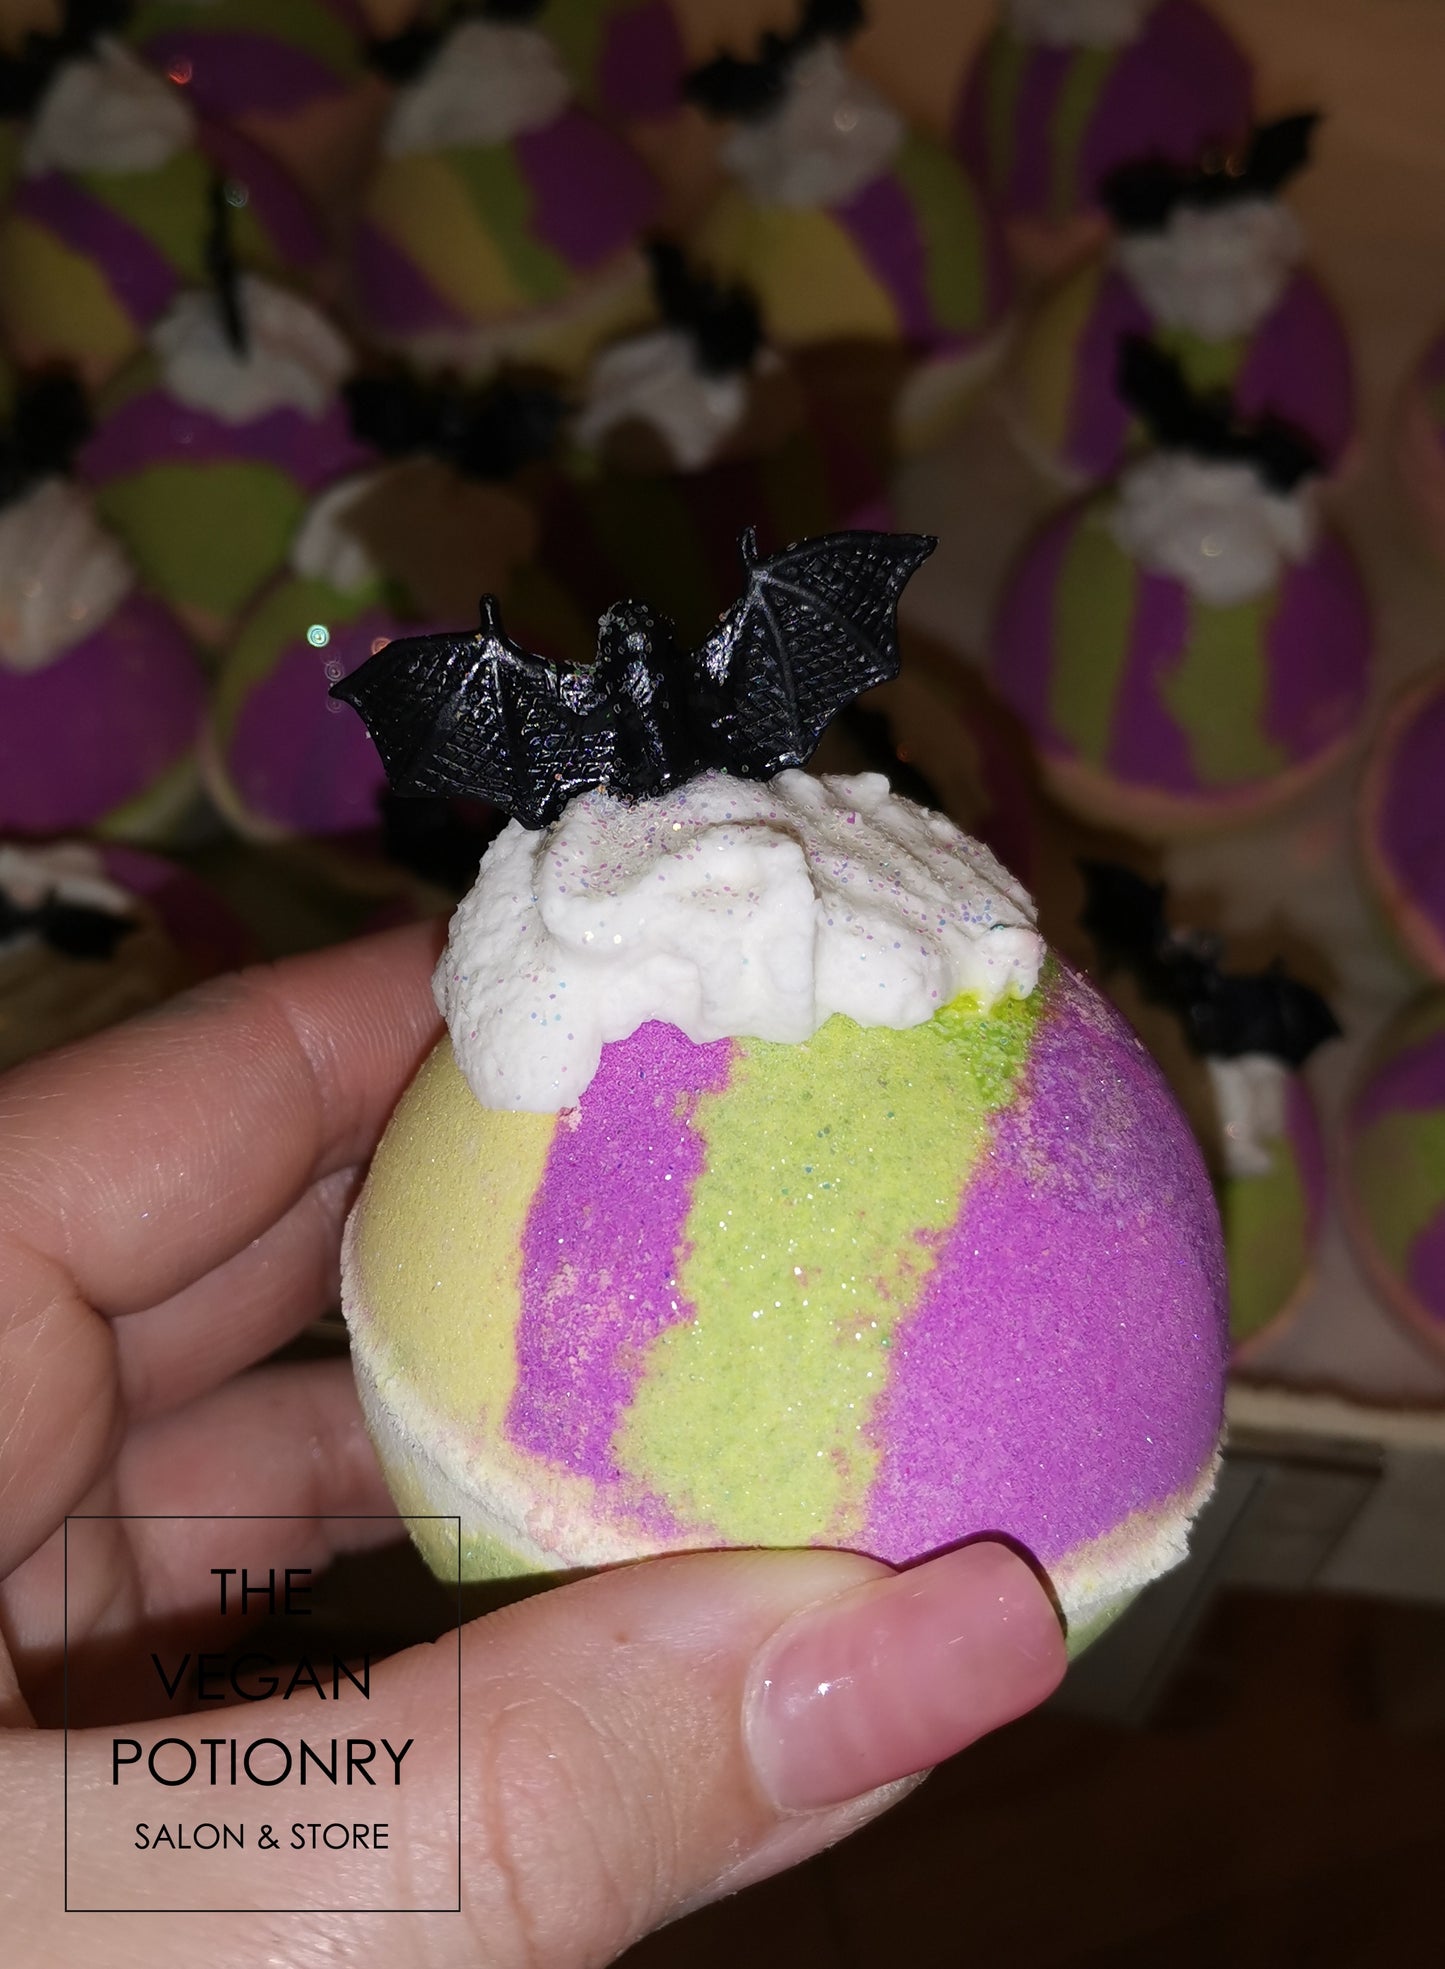 CREEP-IT-REAL Bubbling Bath Bombs with Bat Toys | The Vegan Potionry